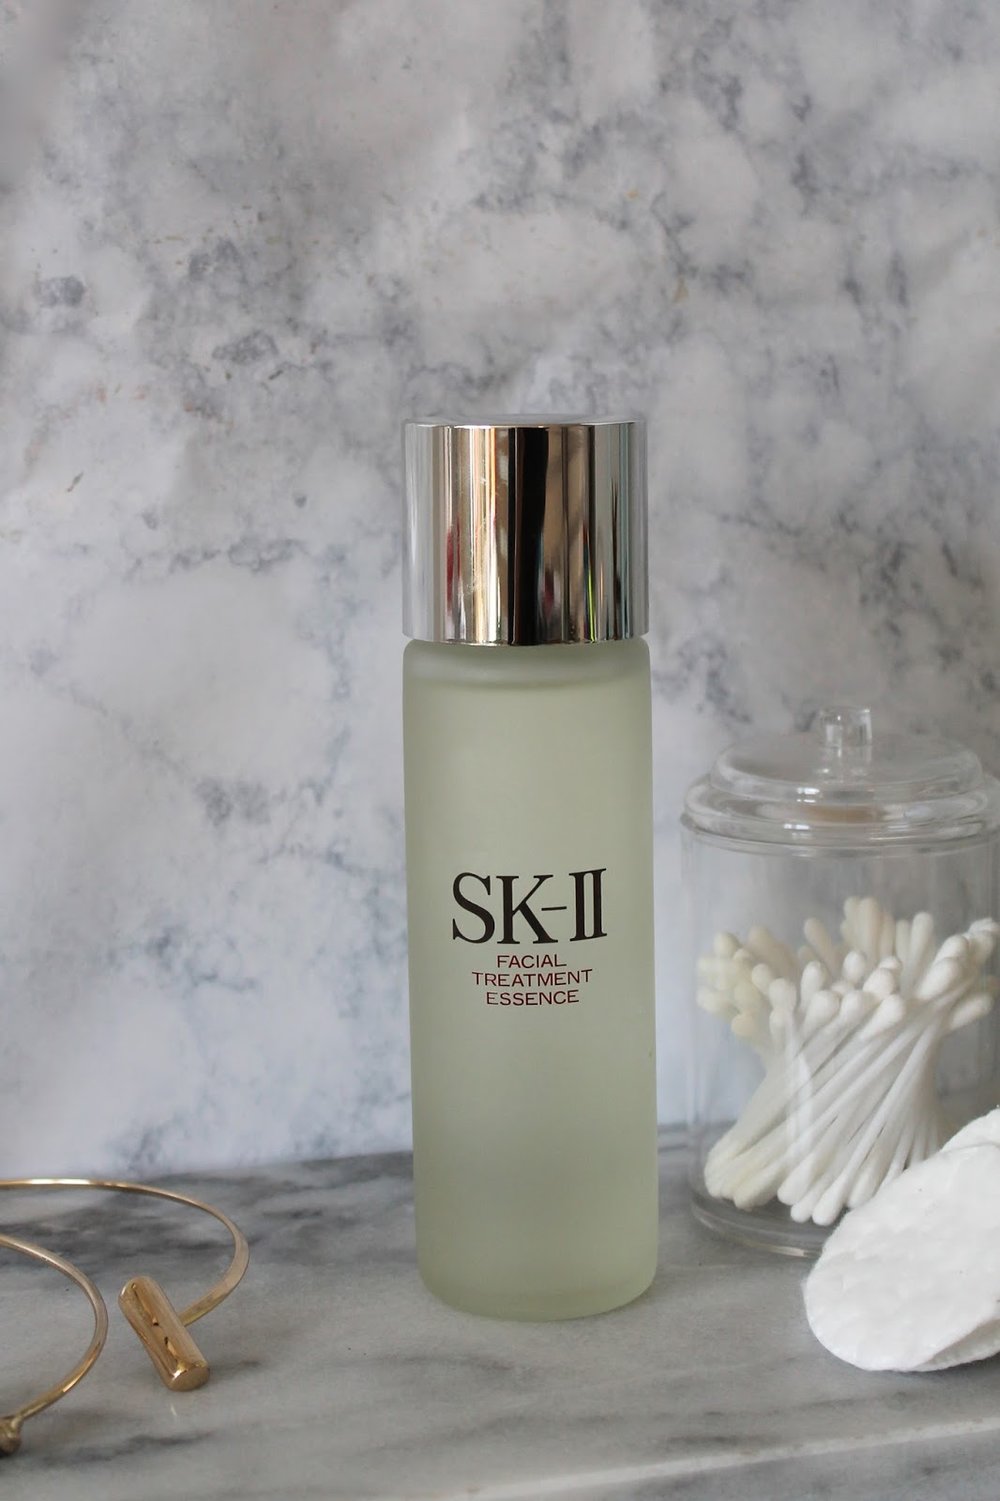 sk II facial essence, the best beauty routine, how to use sk II